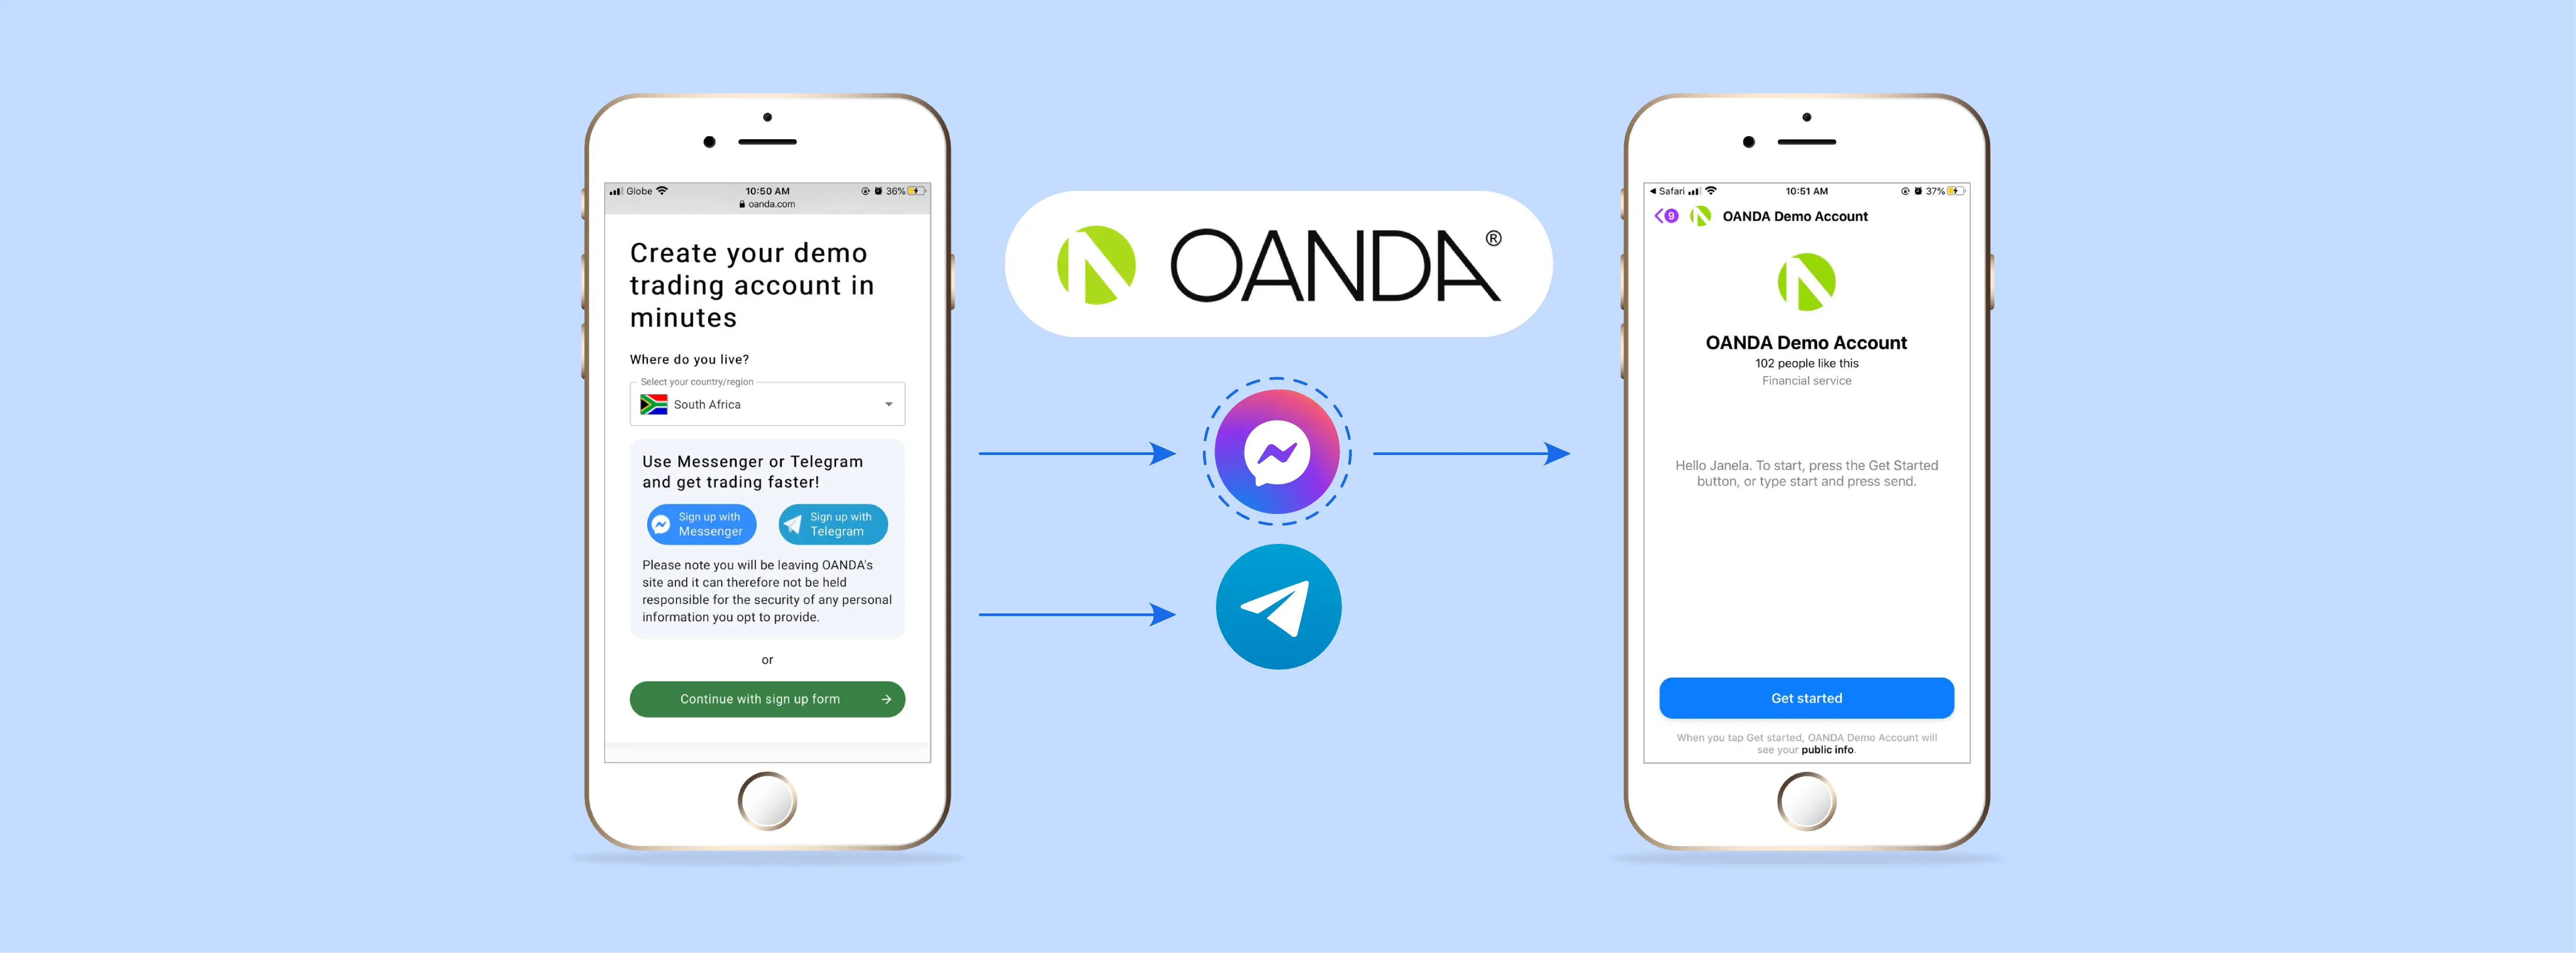 Oanda working with Convrs to optimize the demo account opening process